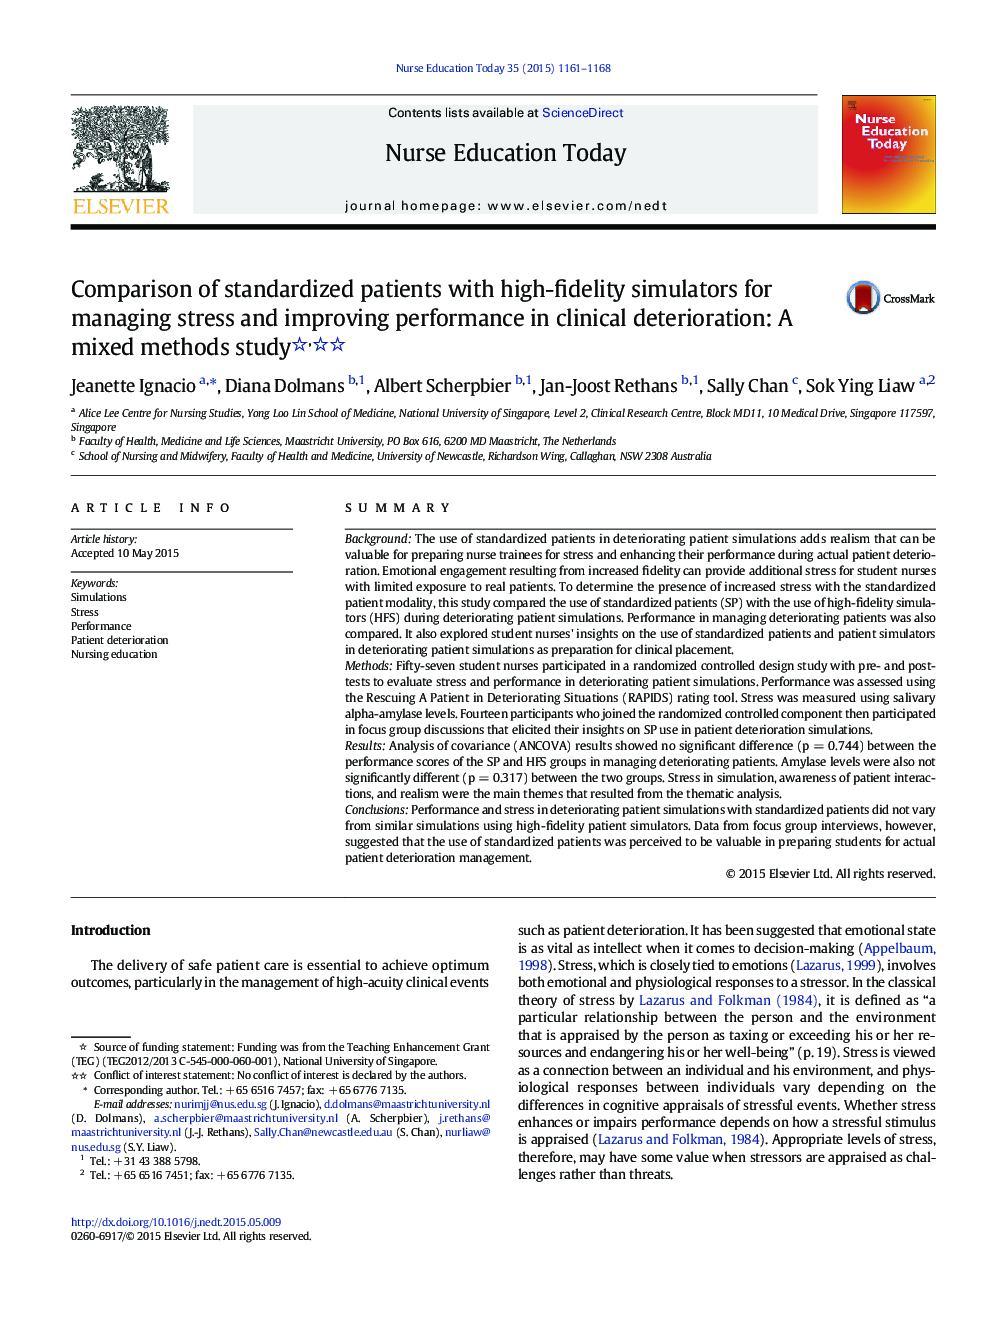 Comparison of standardized patients with high-fidelity simulators for managing stress and improving performance in clinical deterioration: A mixed methods study 